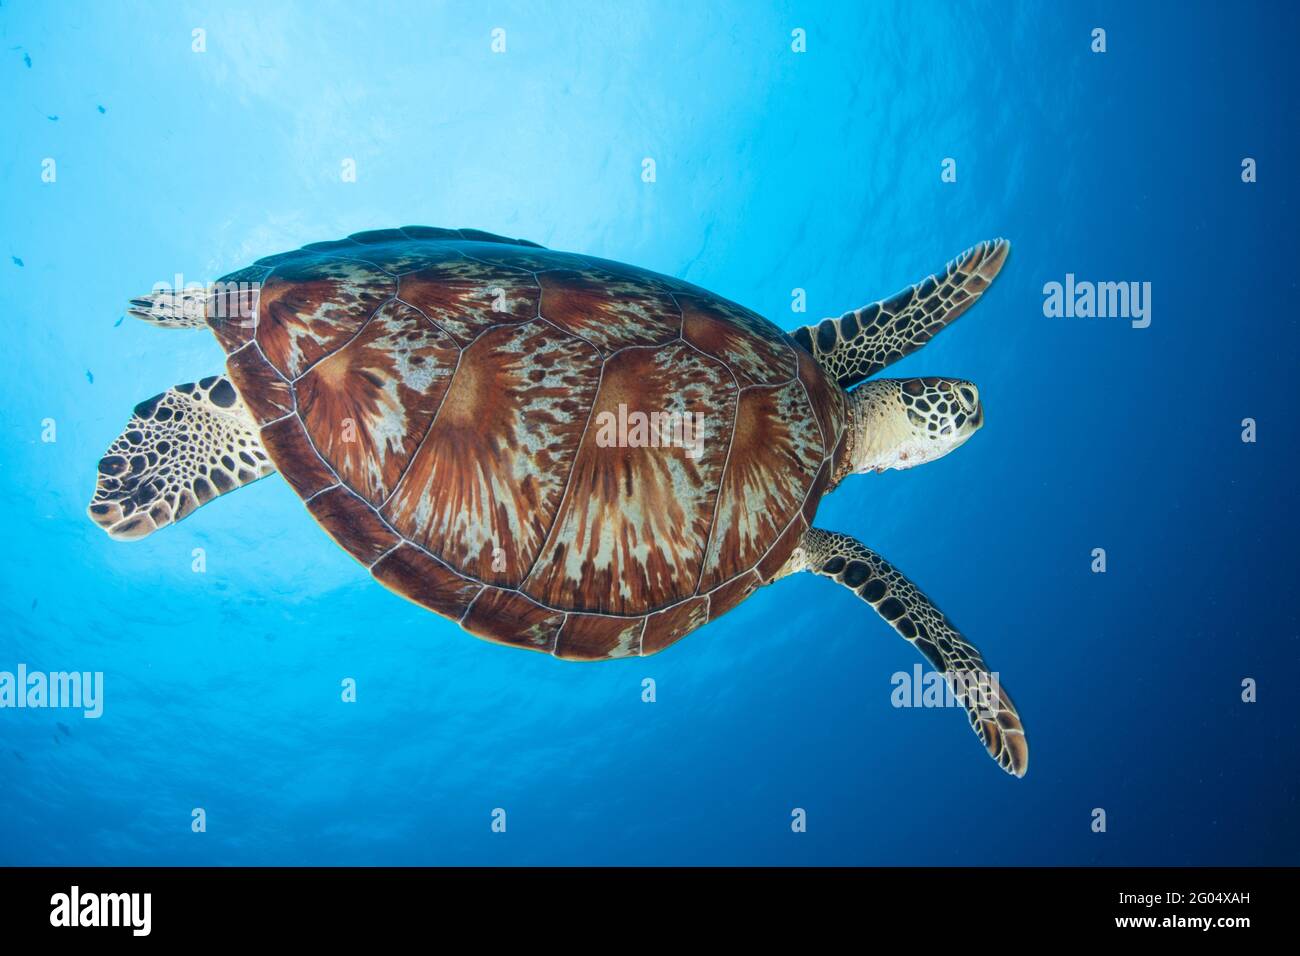 A Green sea turtle, Chelonia mydas, swims through clear blue water in Palau. This reptile is an endangered species due to it being hunted for food. Stock Photo